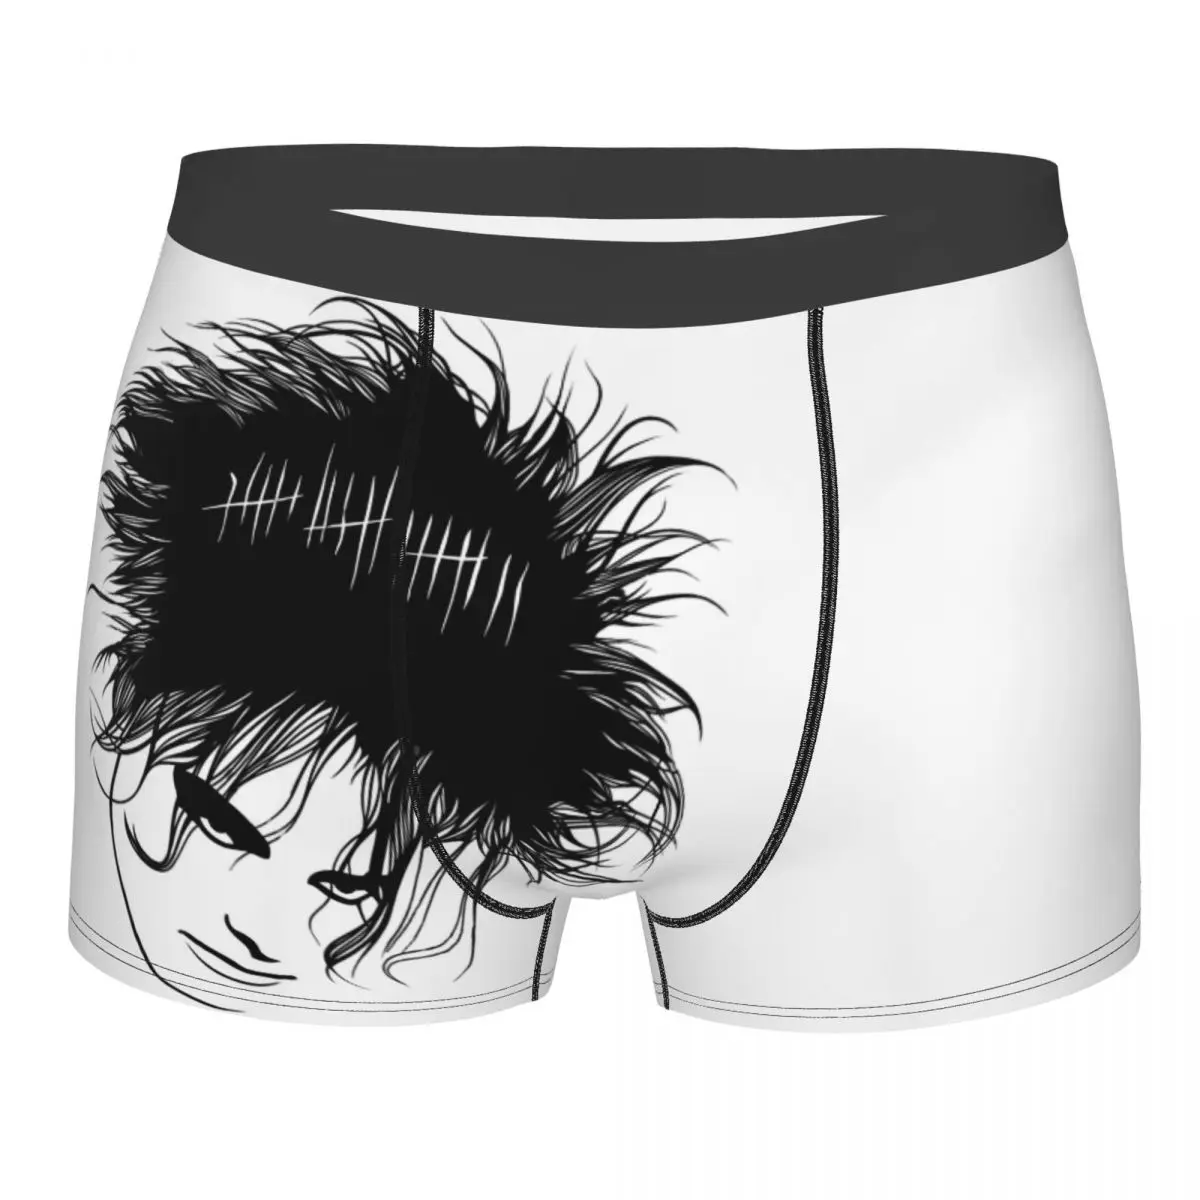 The Cure Robert Smith Men's Boxer Briefs special Highly Breathable Underwear Top Quality 3D Print Shorts Birthday Gifts